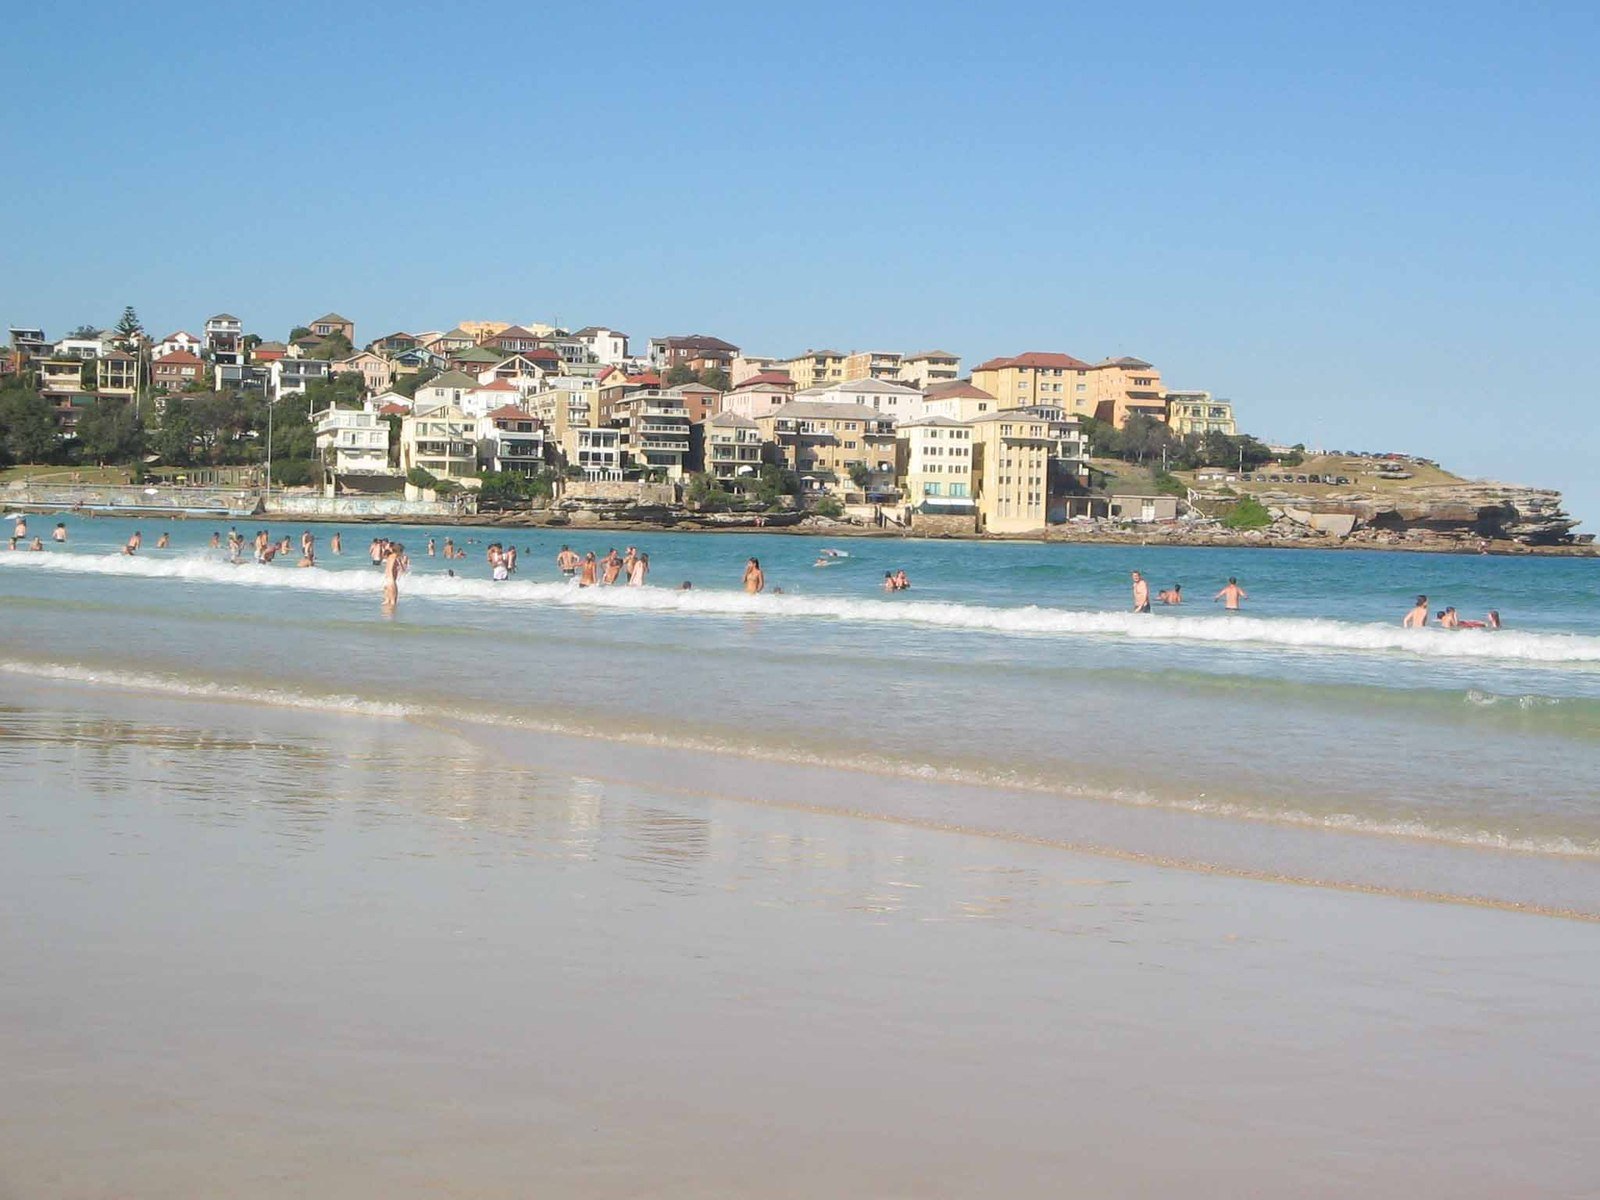 people on the beach near the water with buildings